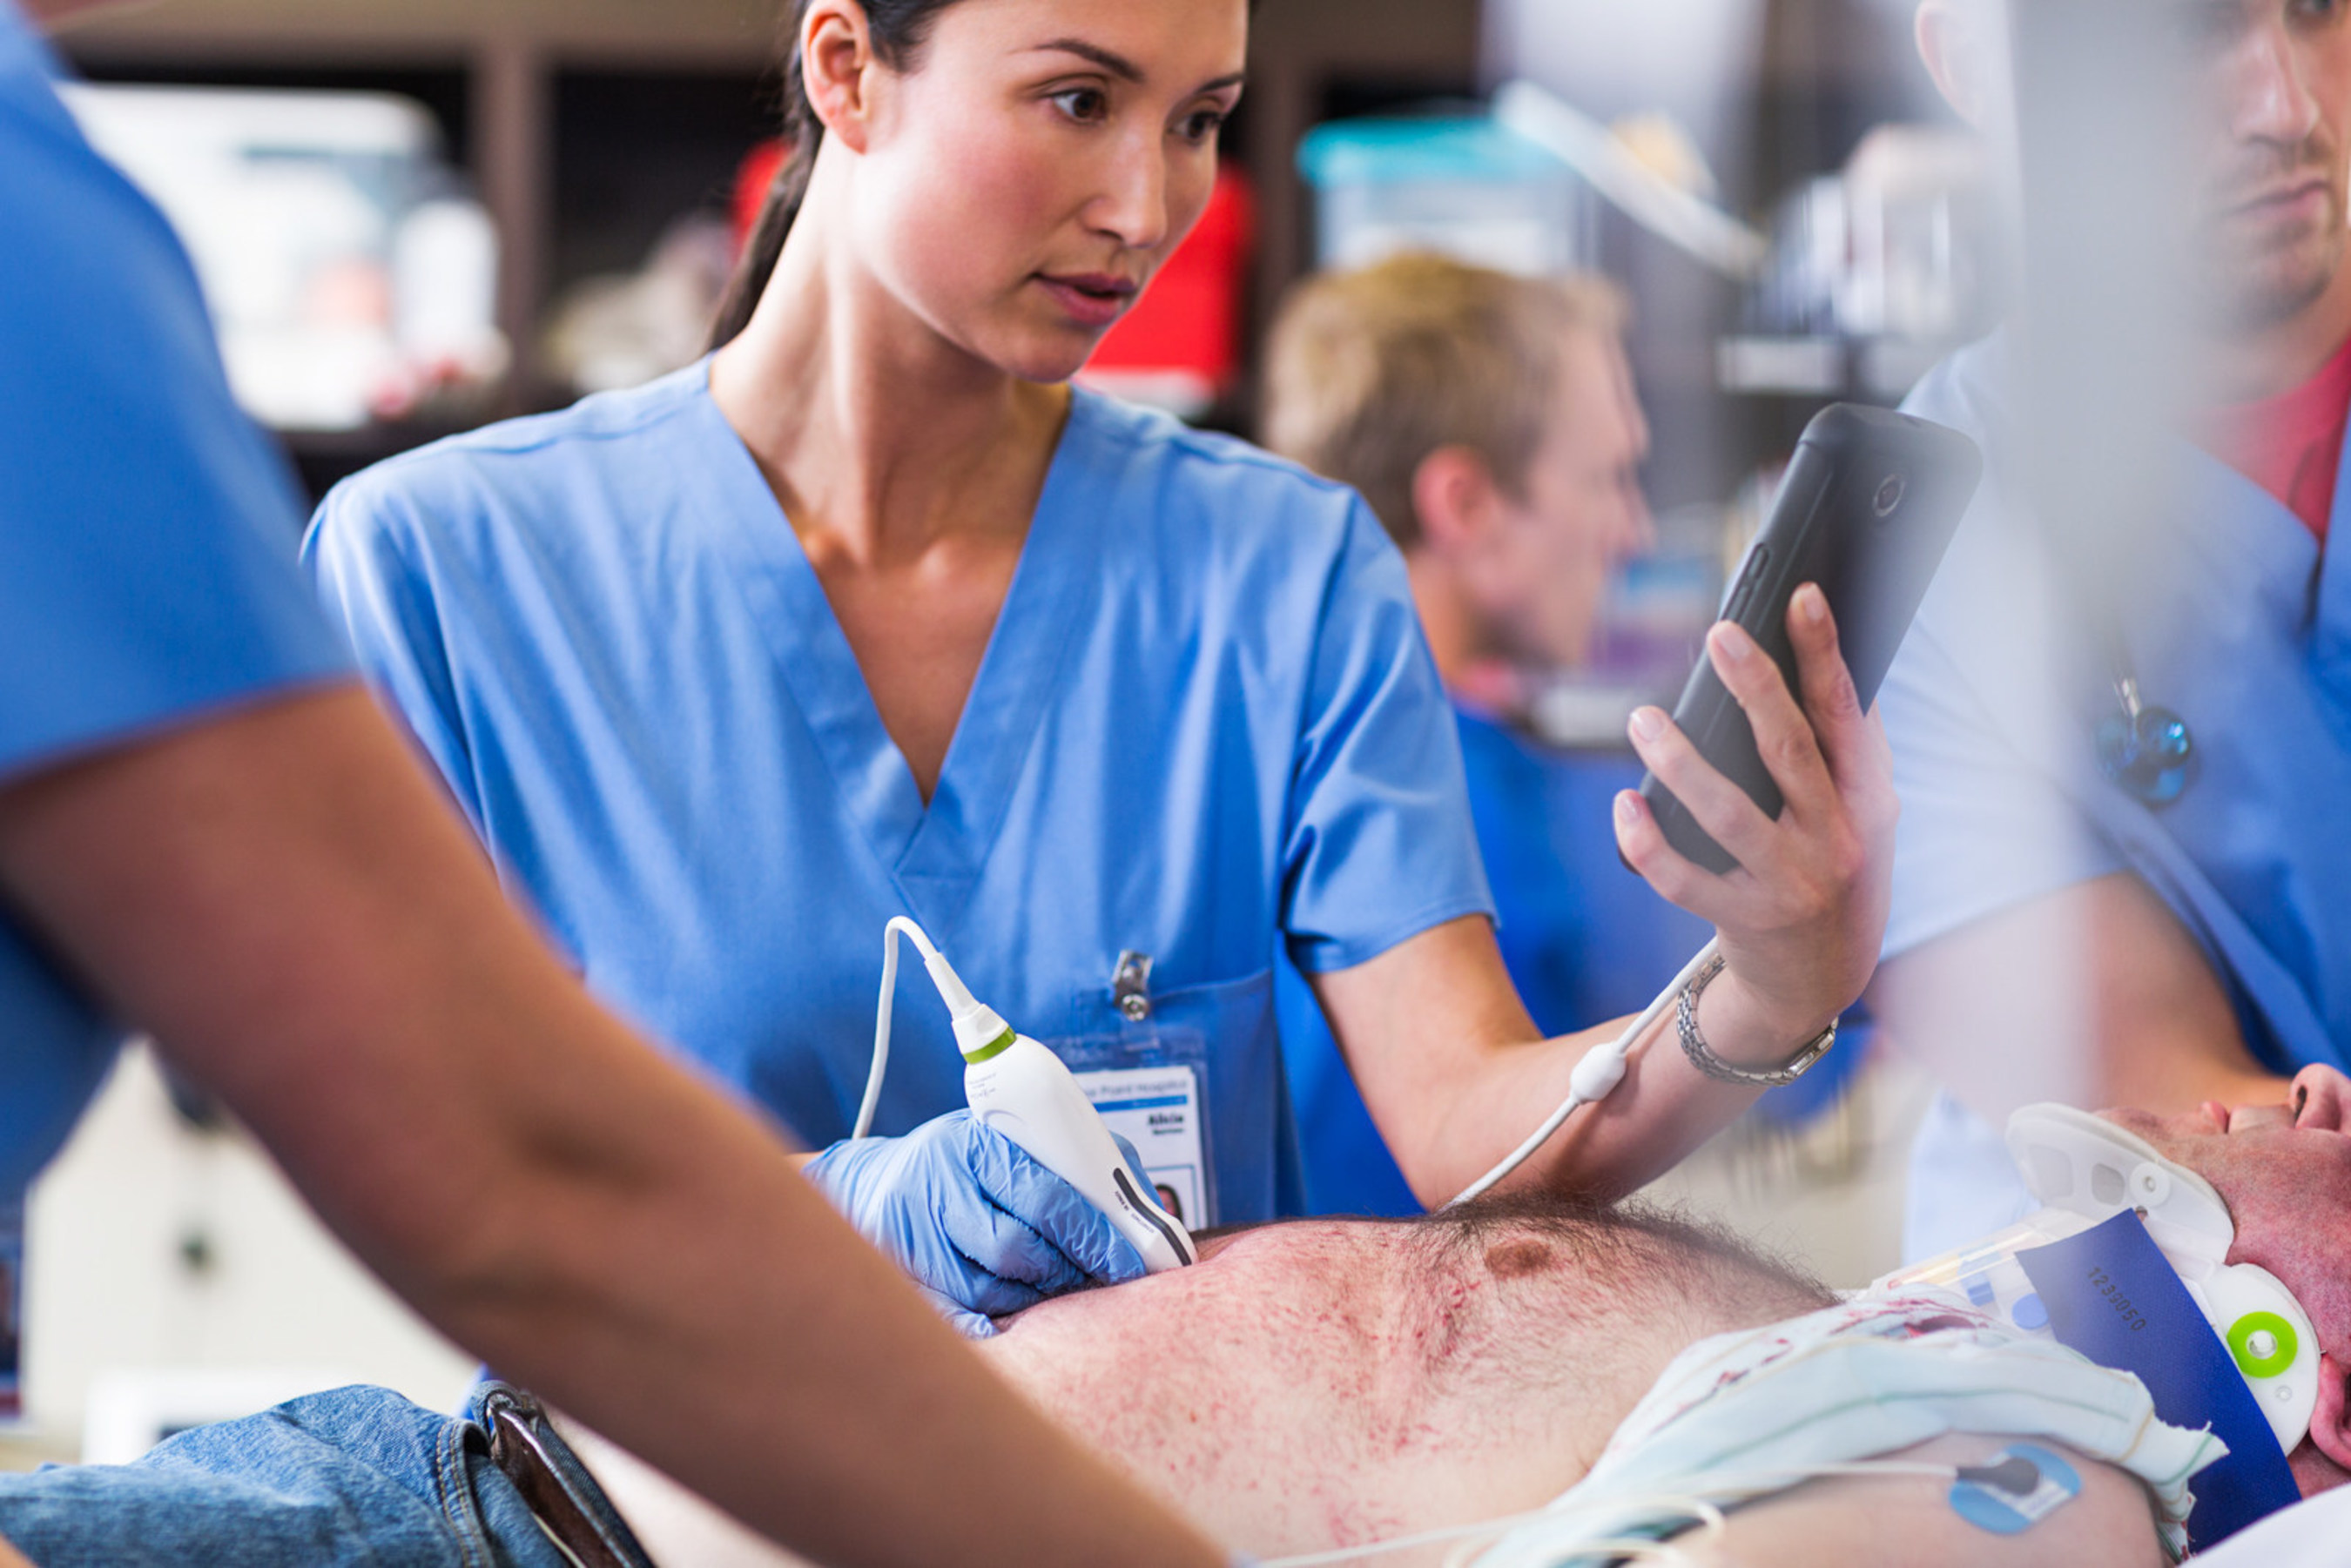 As a customized app-based solution, Lumify offers healthcare professionals connectivity, flexibility and mobility.